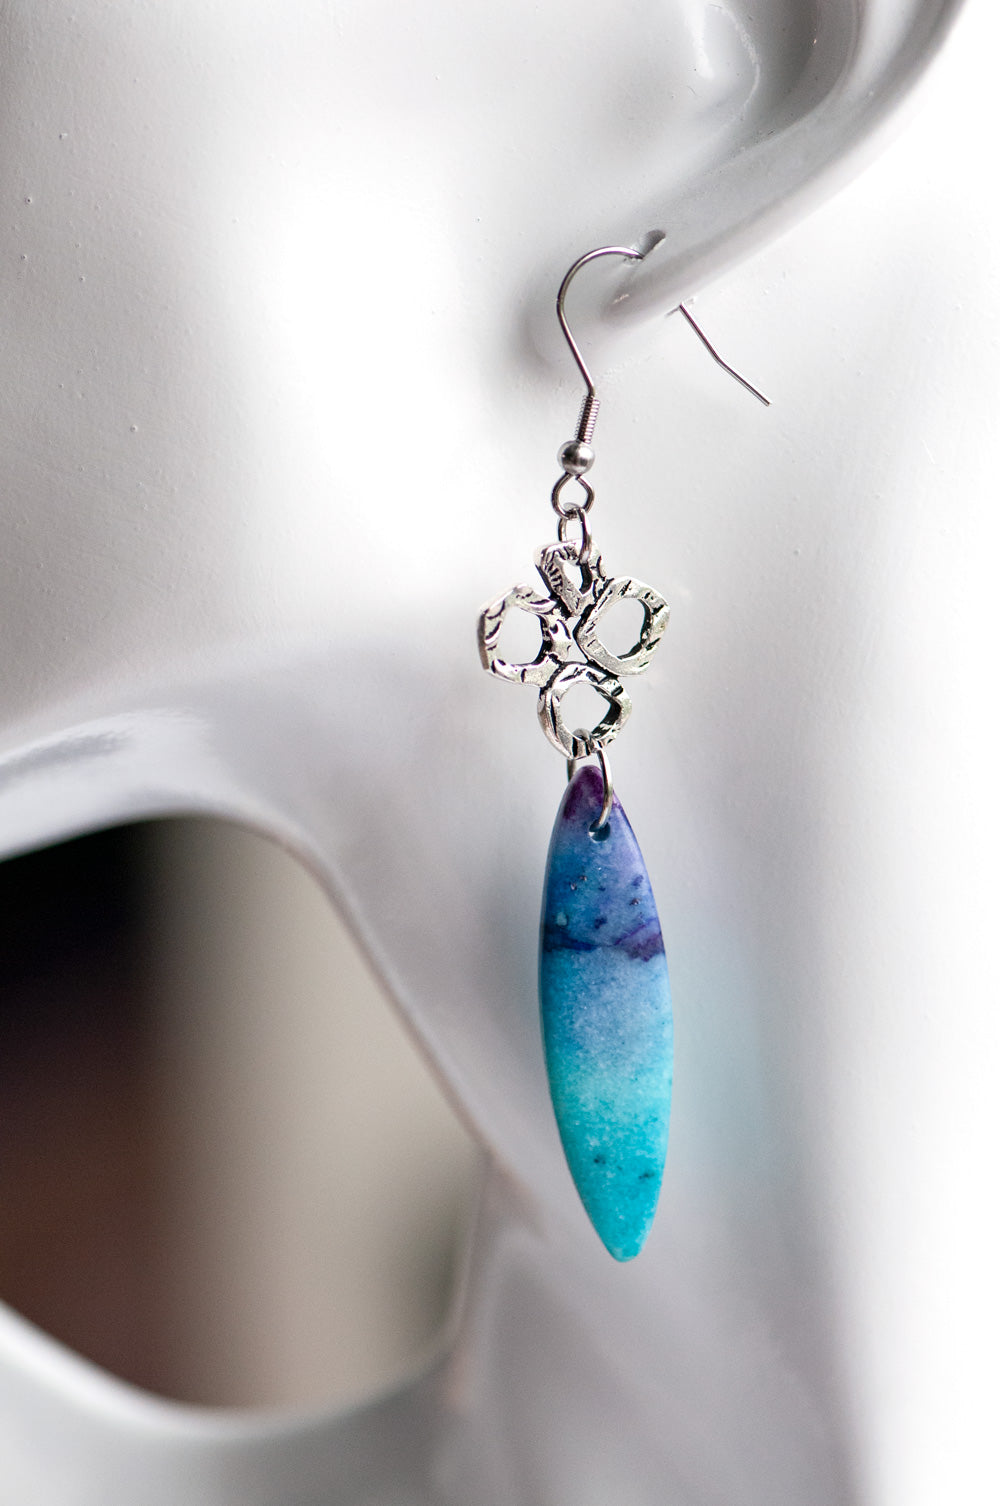 These gorgeous dangle earrings combine dyed Calcite in purple and turquoise with fun and funky TierraCast silver links on stainless steel hooks